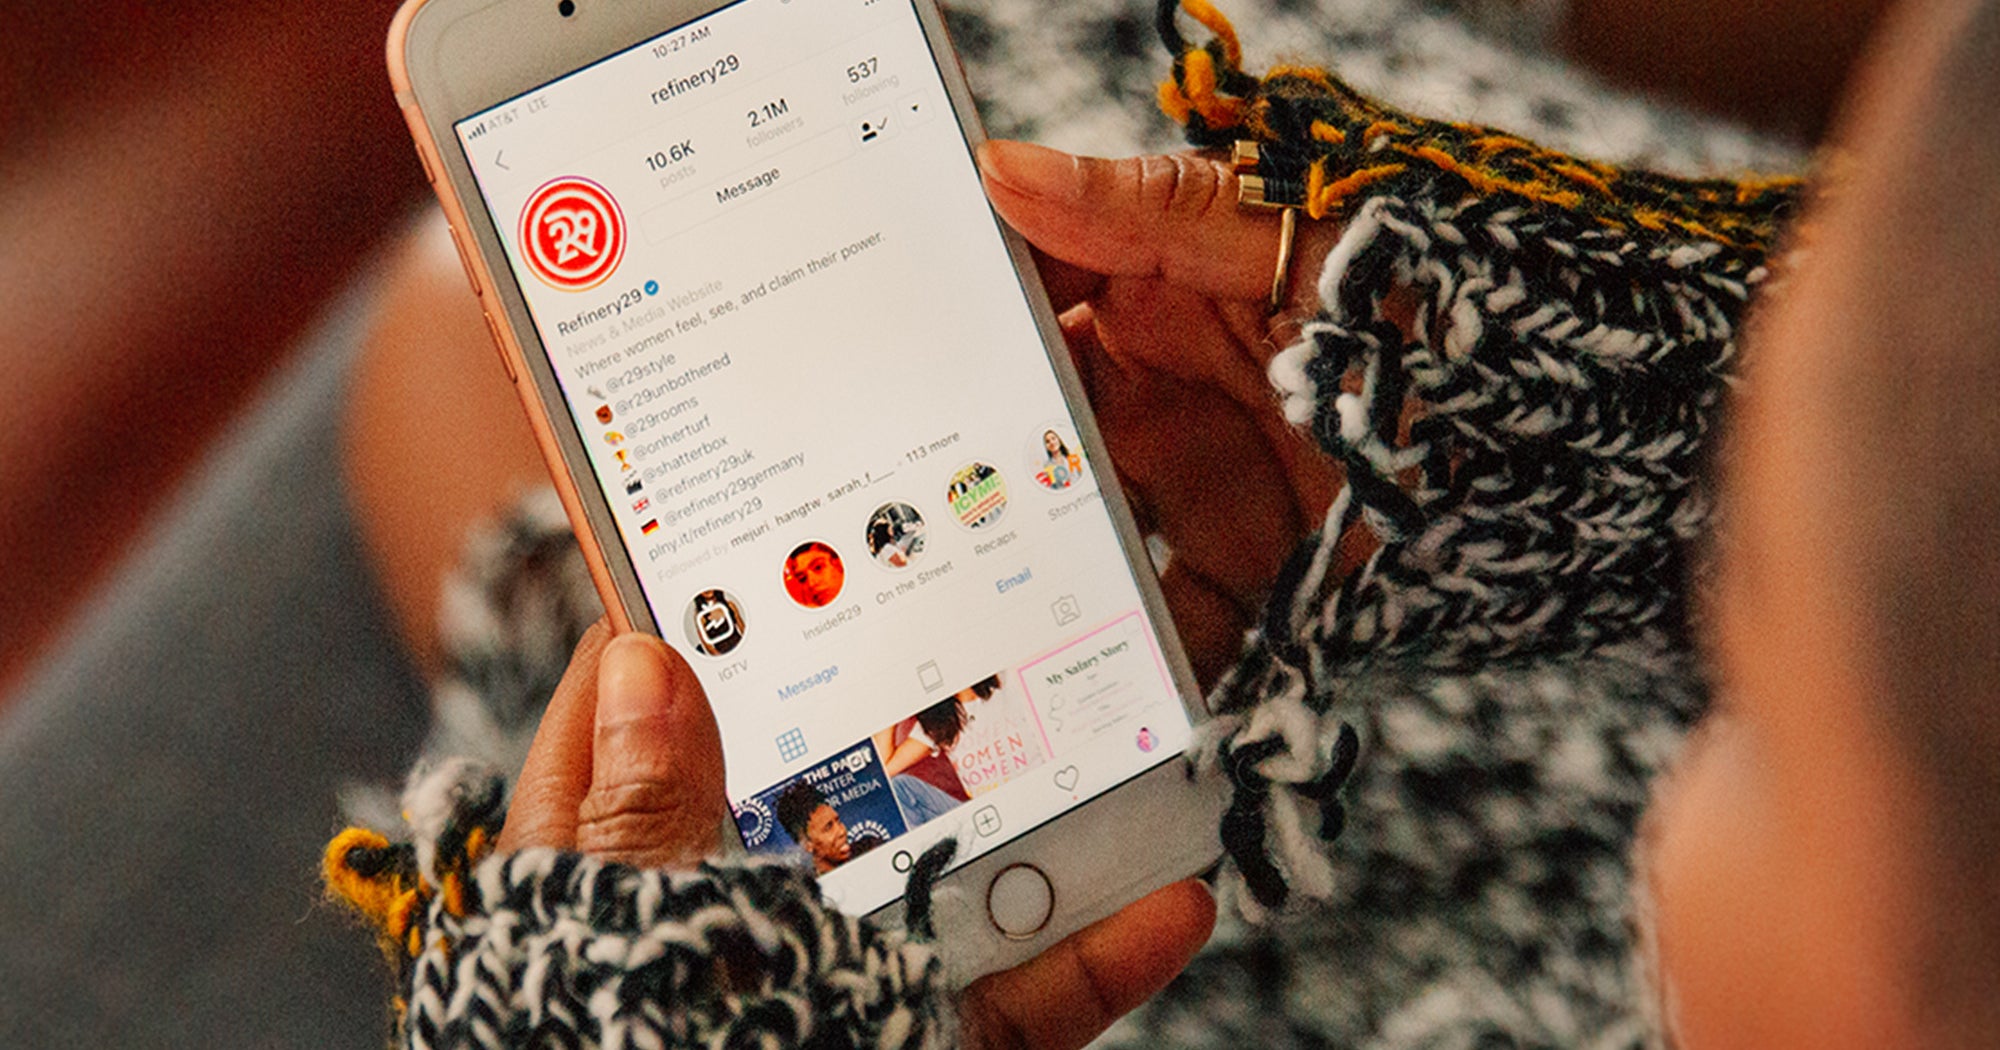 Instagram Introduces New Categories For Who You Follow